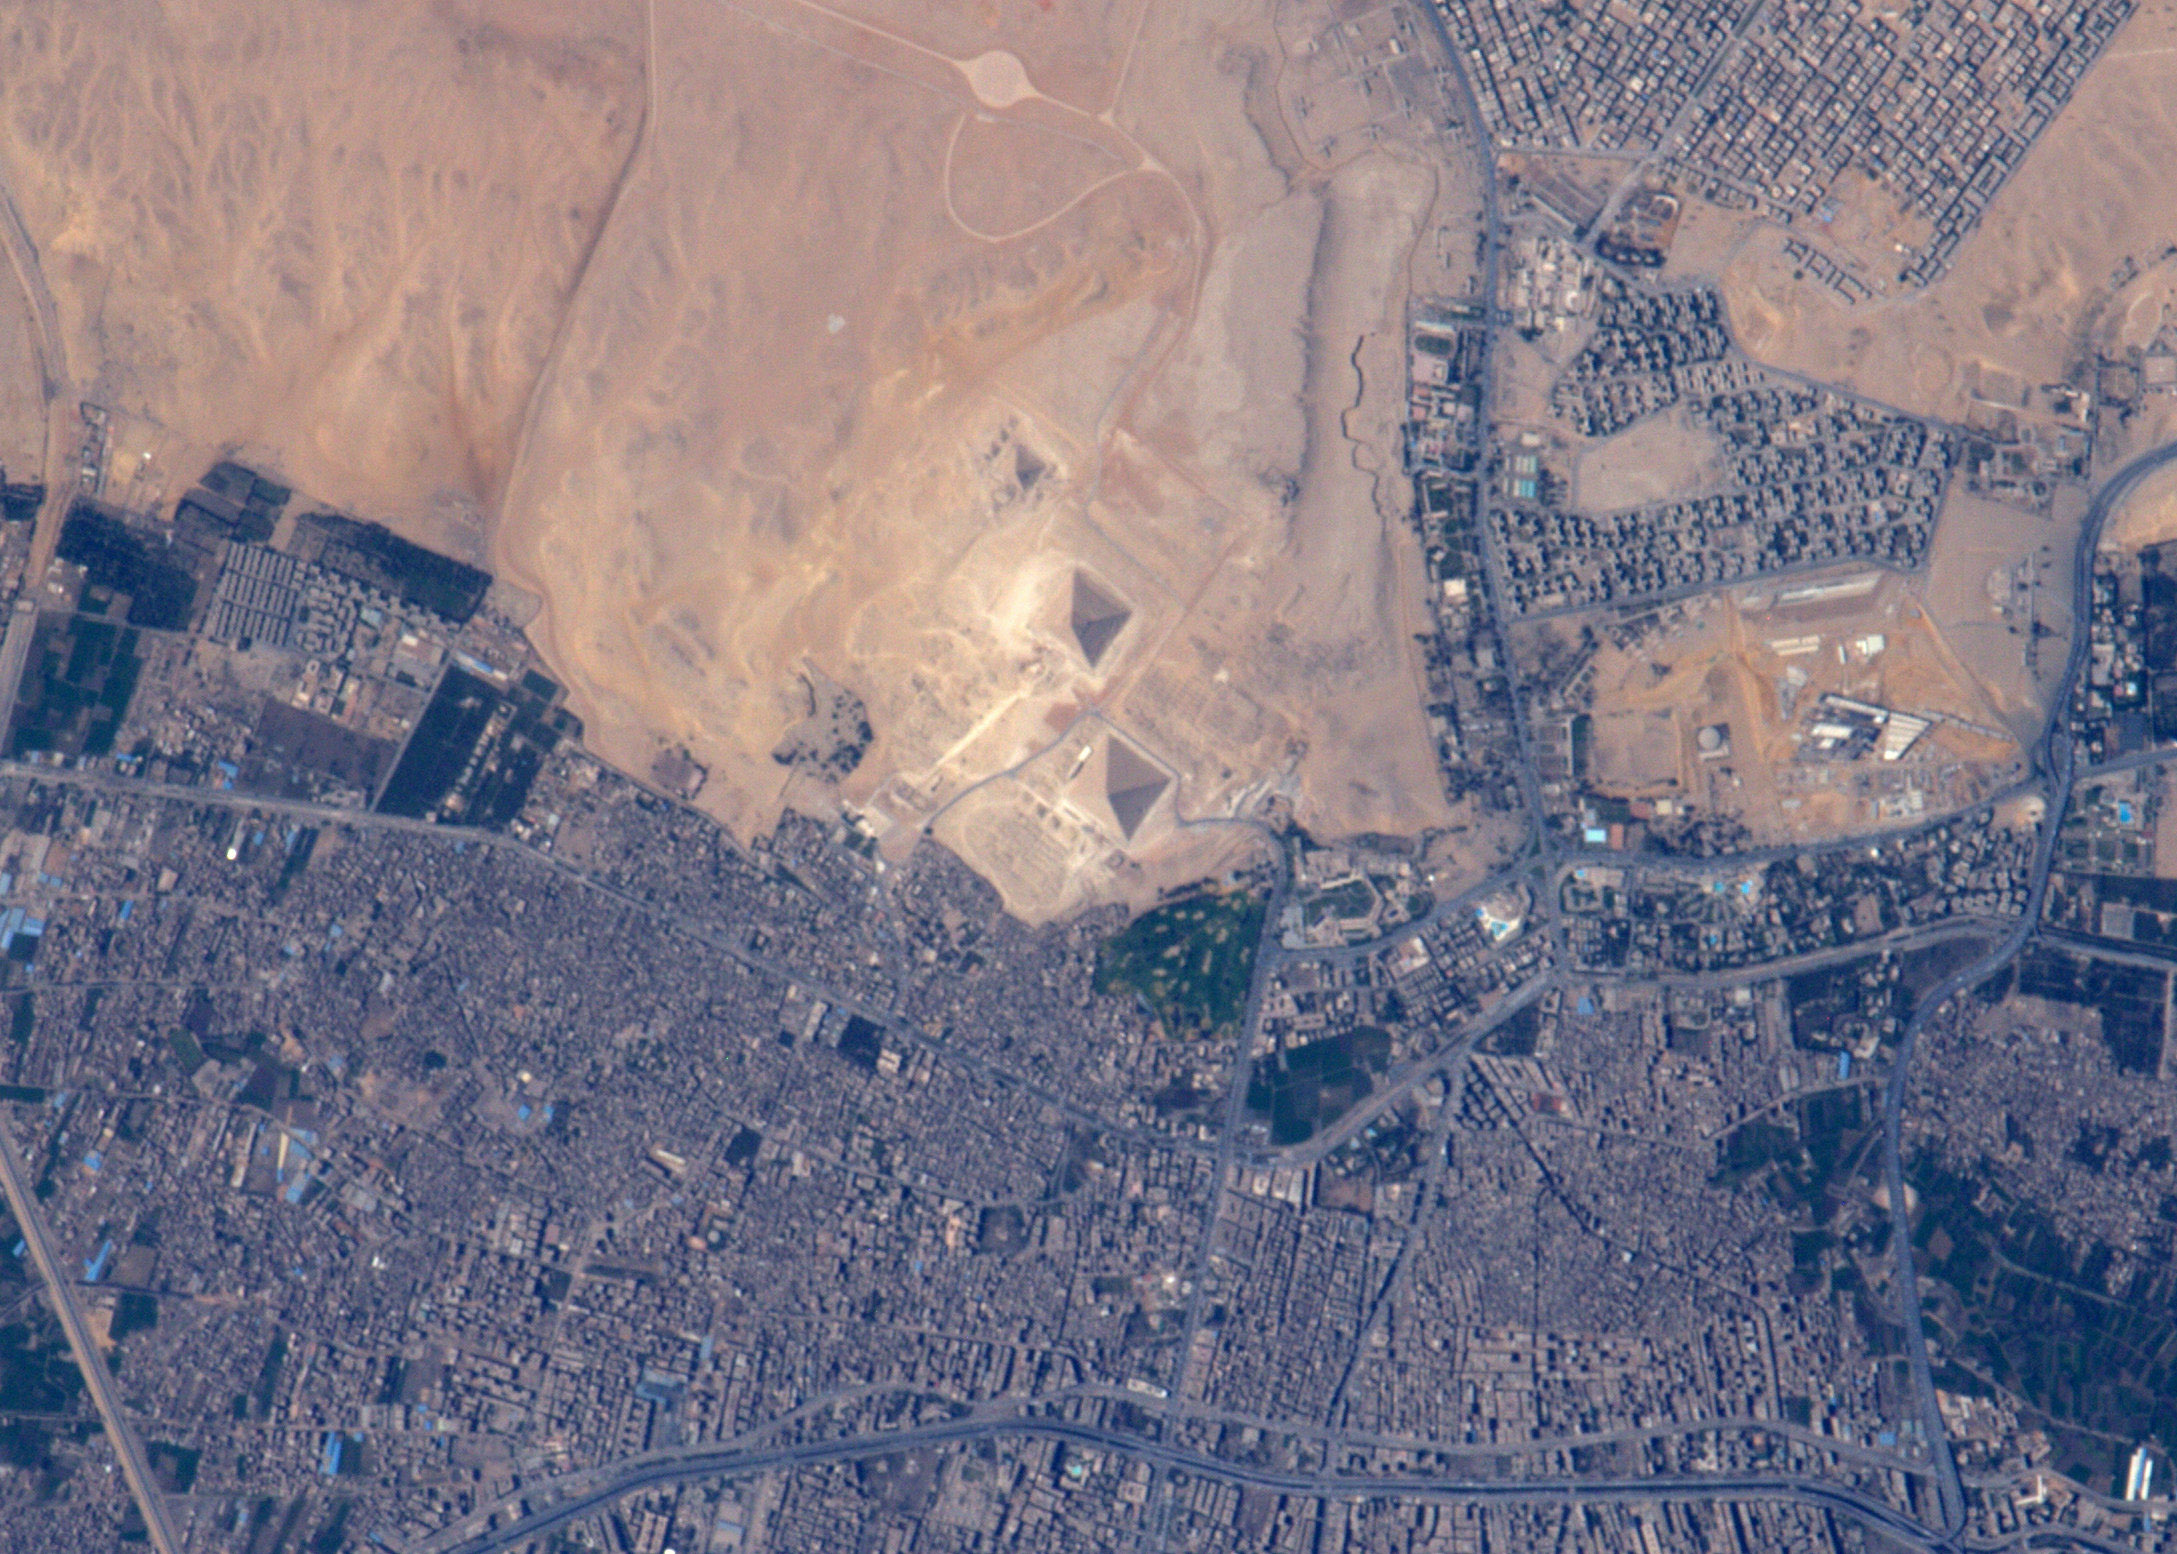 The Giza pyramids on the outskirts of Cairo, Egypt, April 19, 2016.